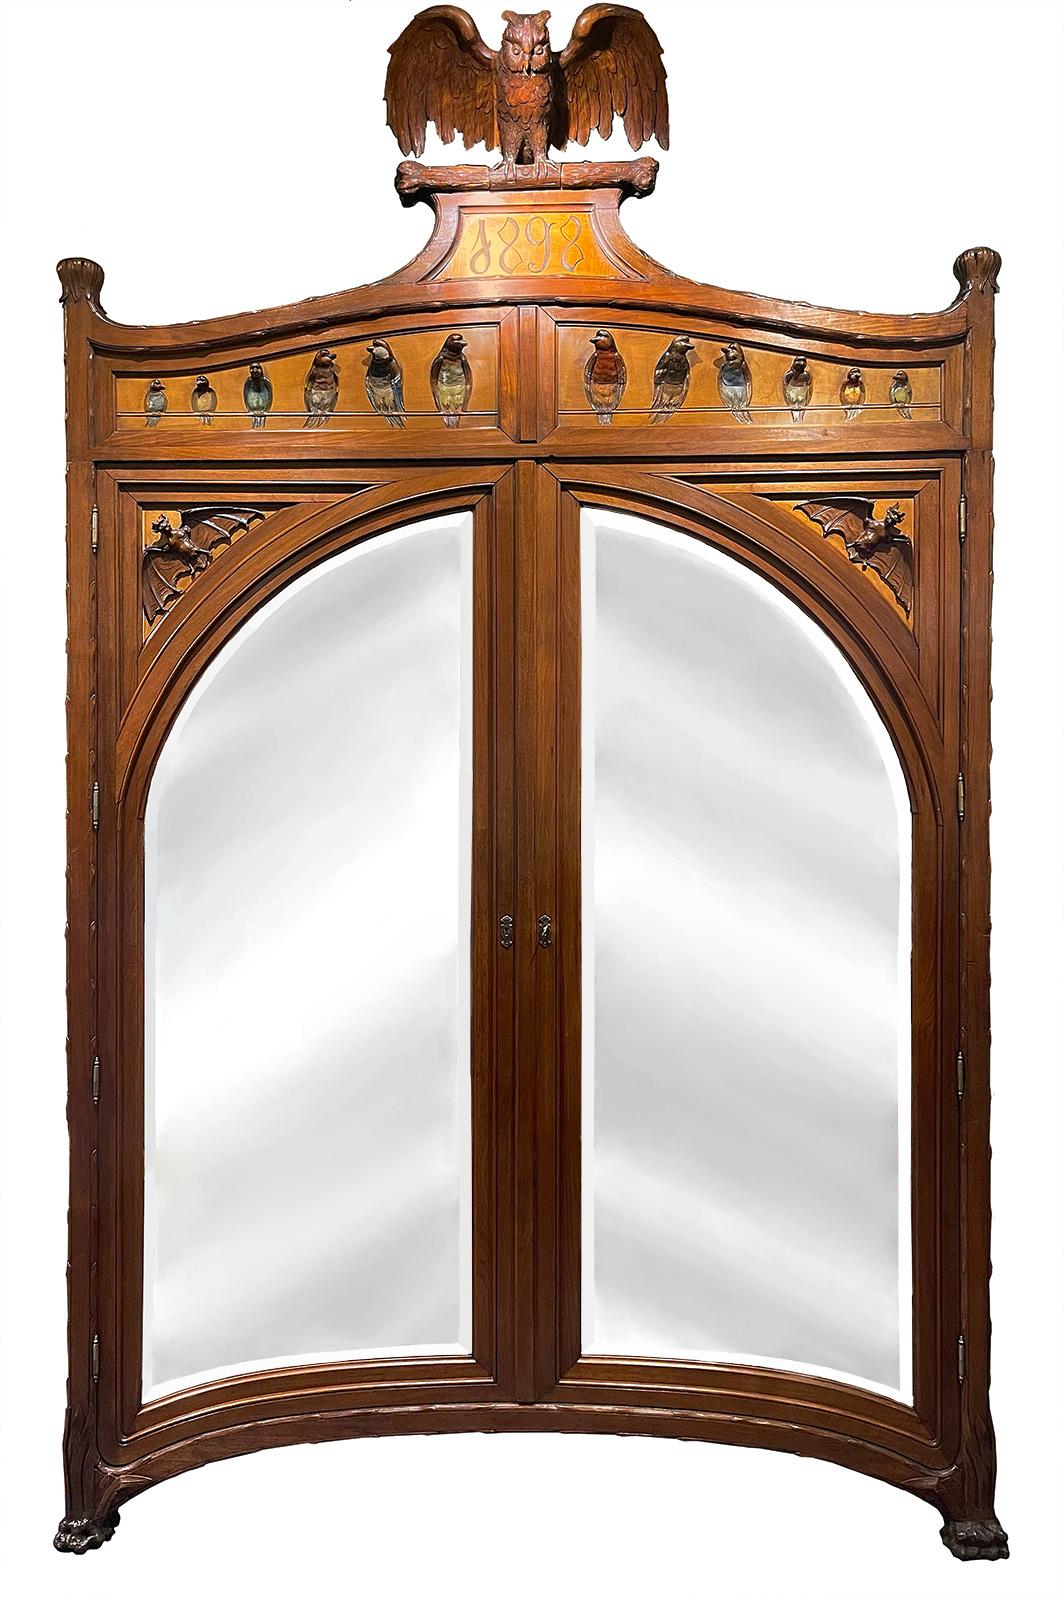 A late 19th century French Art Nouveau bedroom suite with carved owls, bats and birds. Includes a mirrored armoire, full-size bed frame, dressing table, and nightstand. Engraved '1898' at top of armoire. Leather design on bed frame and dressing